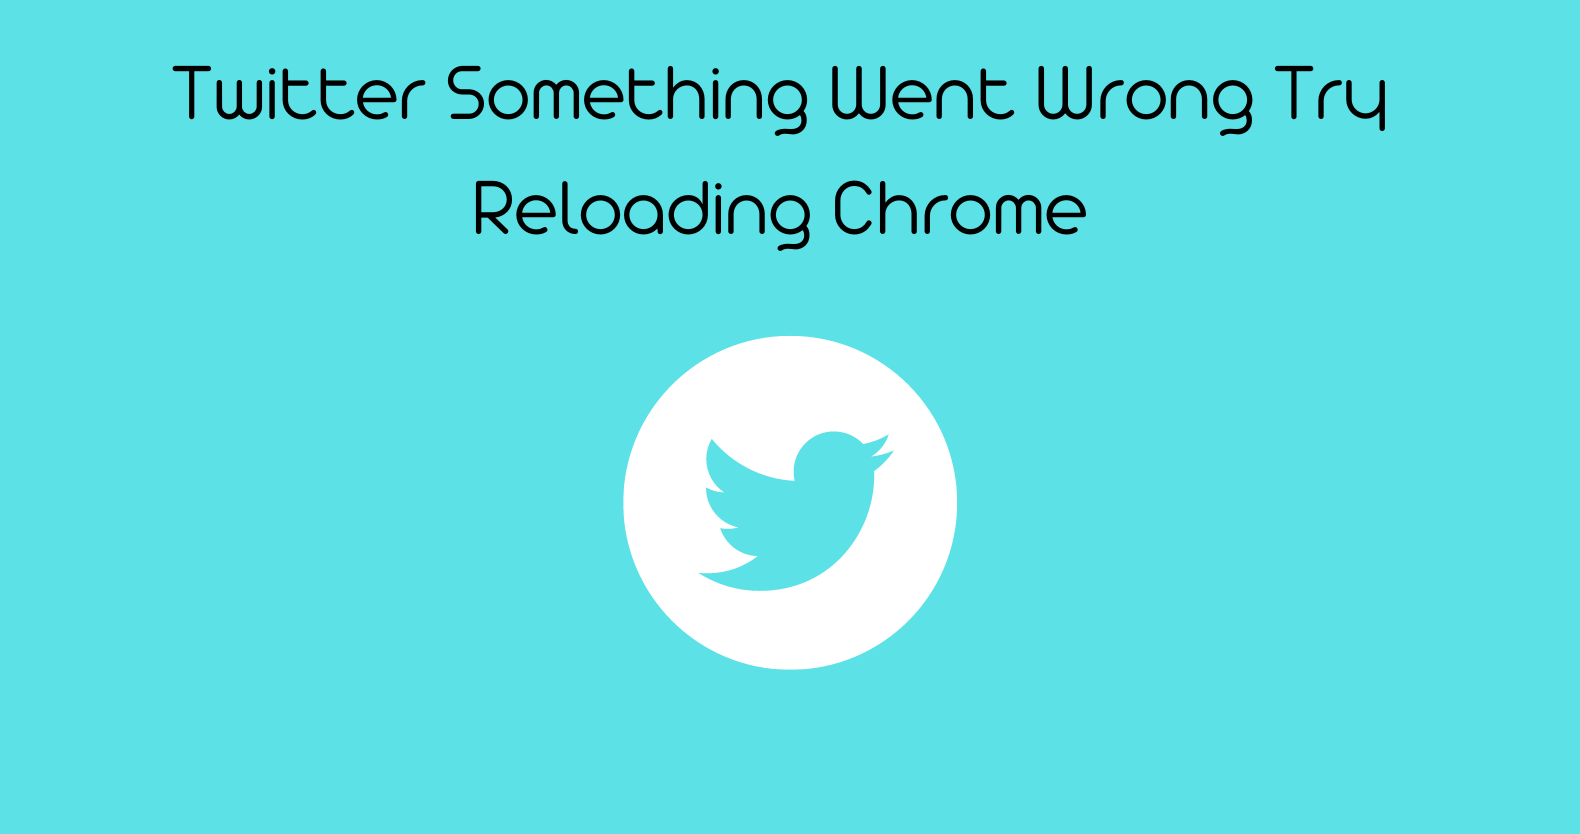 Twitter Something Went Wrong Try Reloading Chrome – Issue Resolved